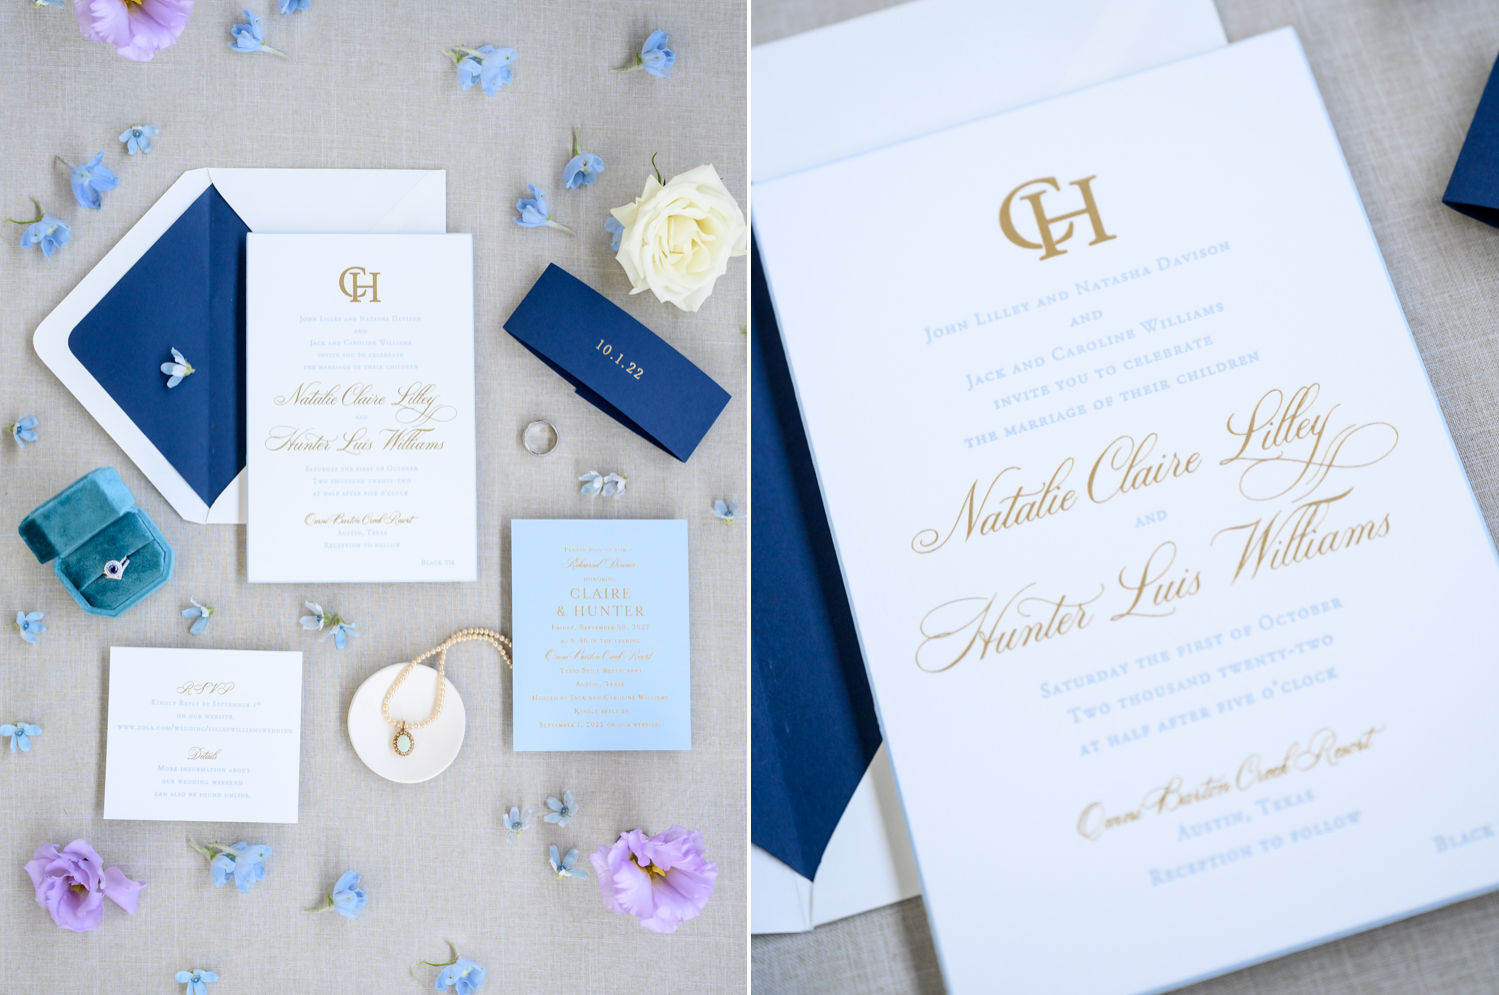 Left: The couple's invitation suite and wedding details including the bride's jewelry and blue, purple, and white flowers. Right: A close up of the wedding invitation with golden script